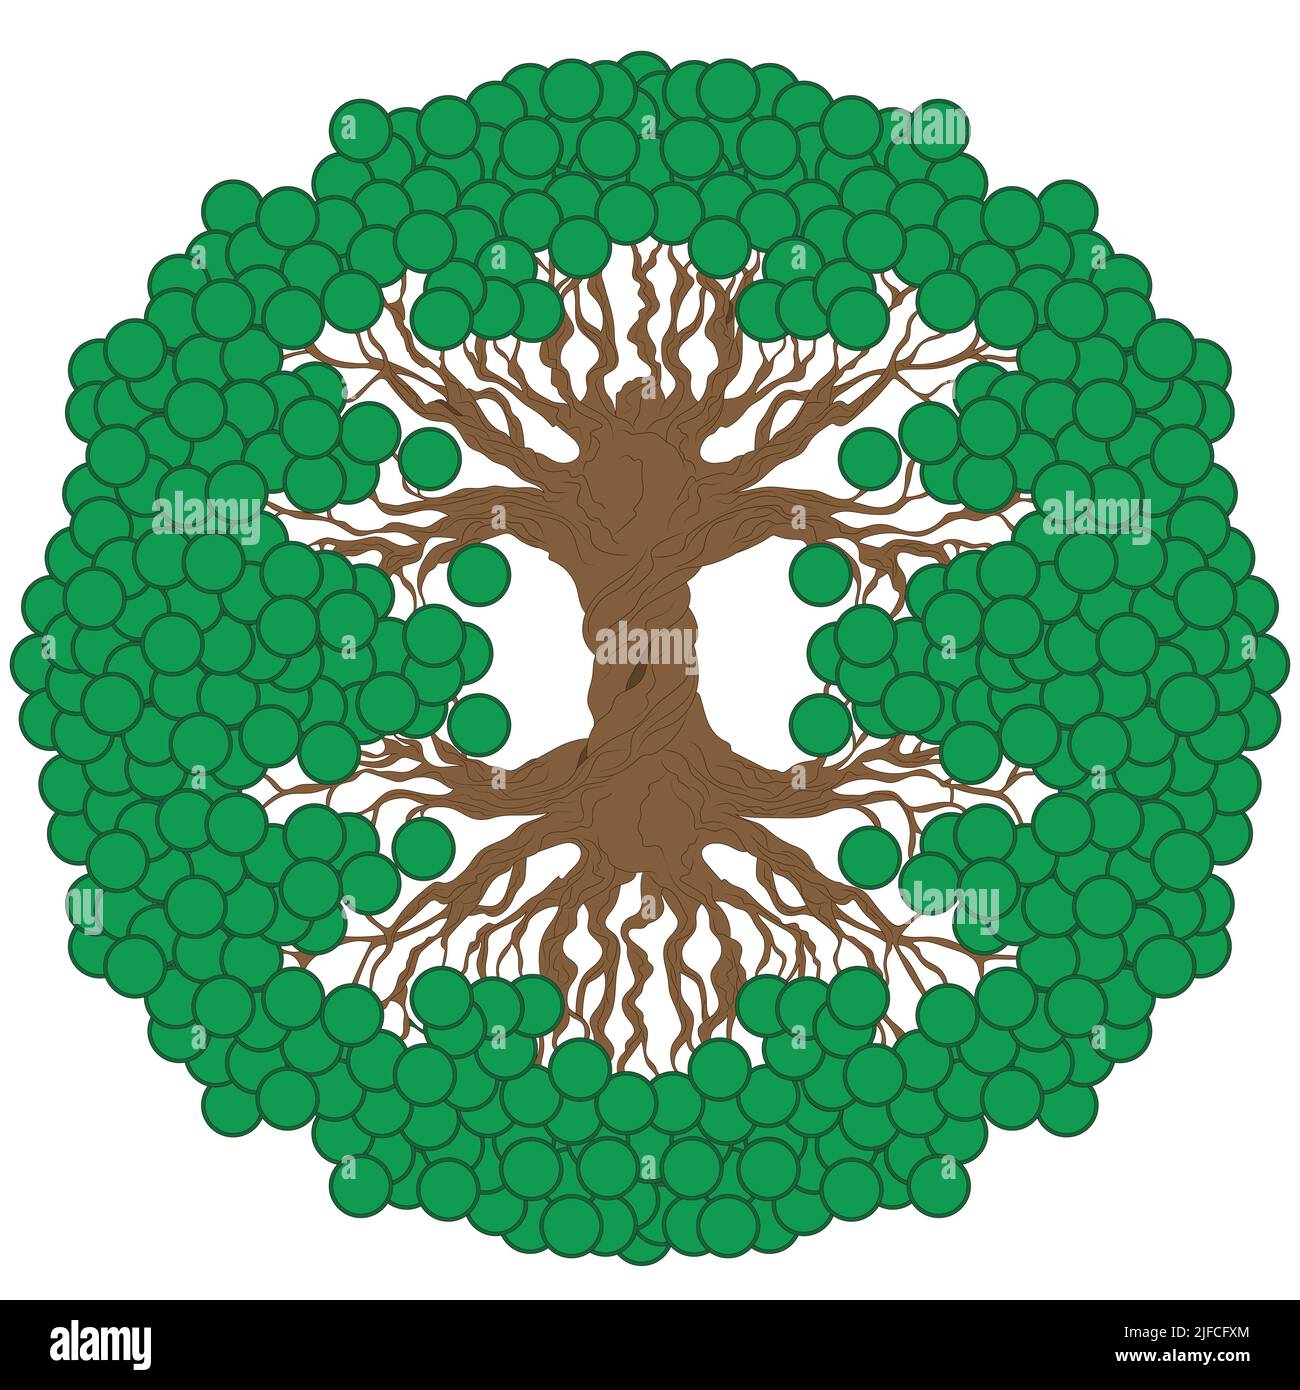 Money tree with green coins. A traditional feng shui symbol for attracting wealth and prosperity. Stock Vector